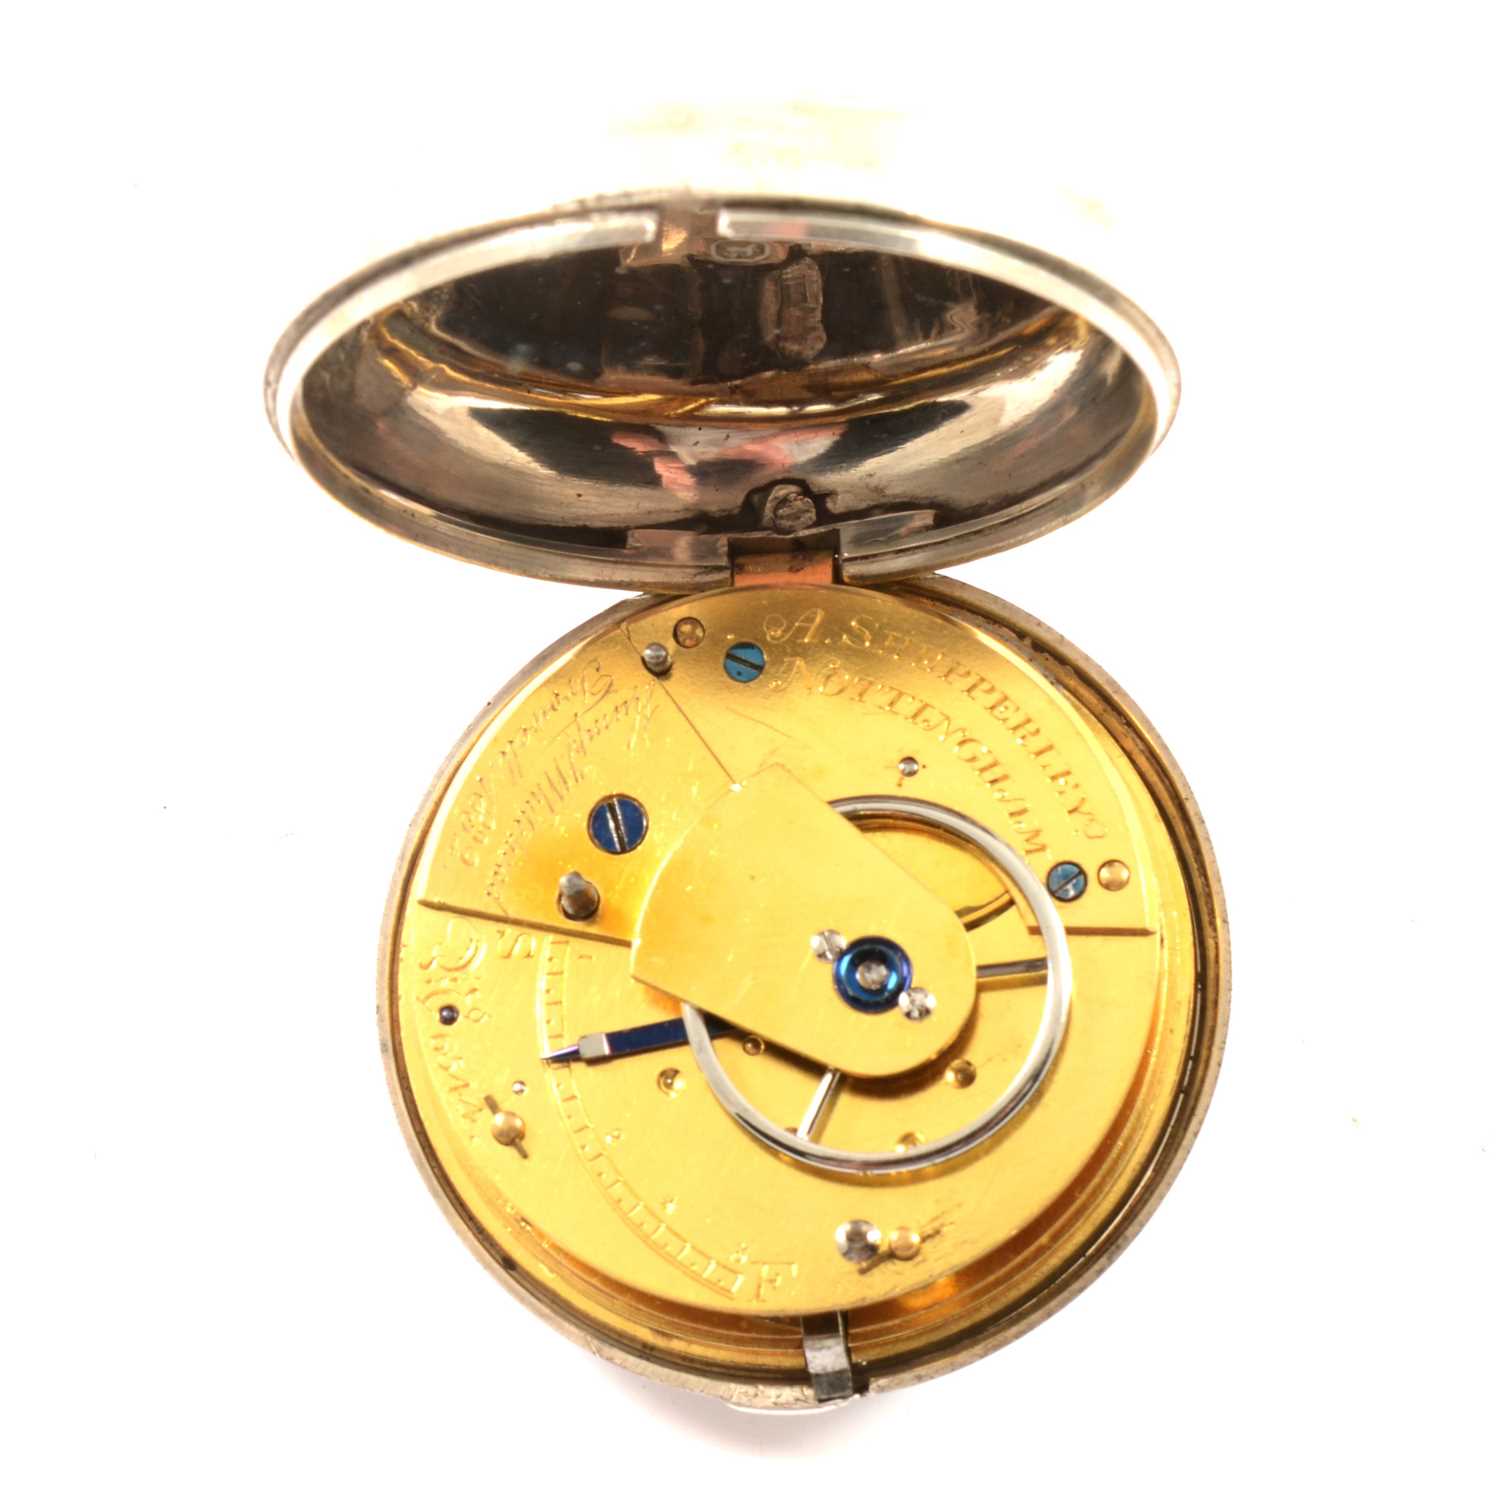 Silver pair cased pocket watch, London 1817, - Image 2 of 2